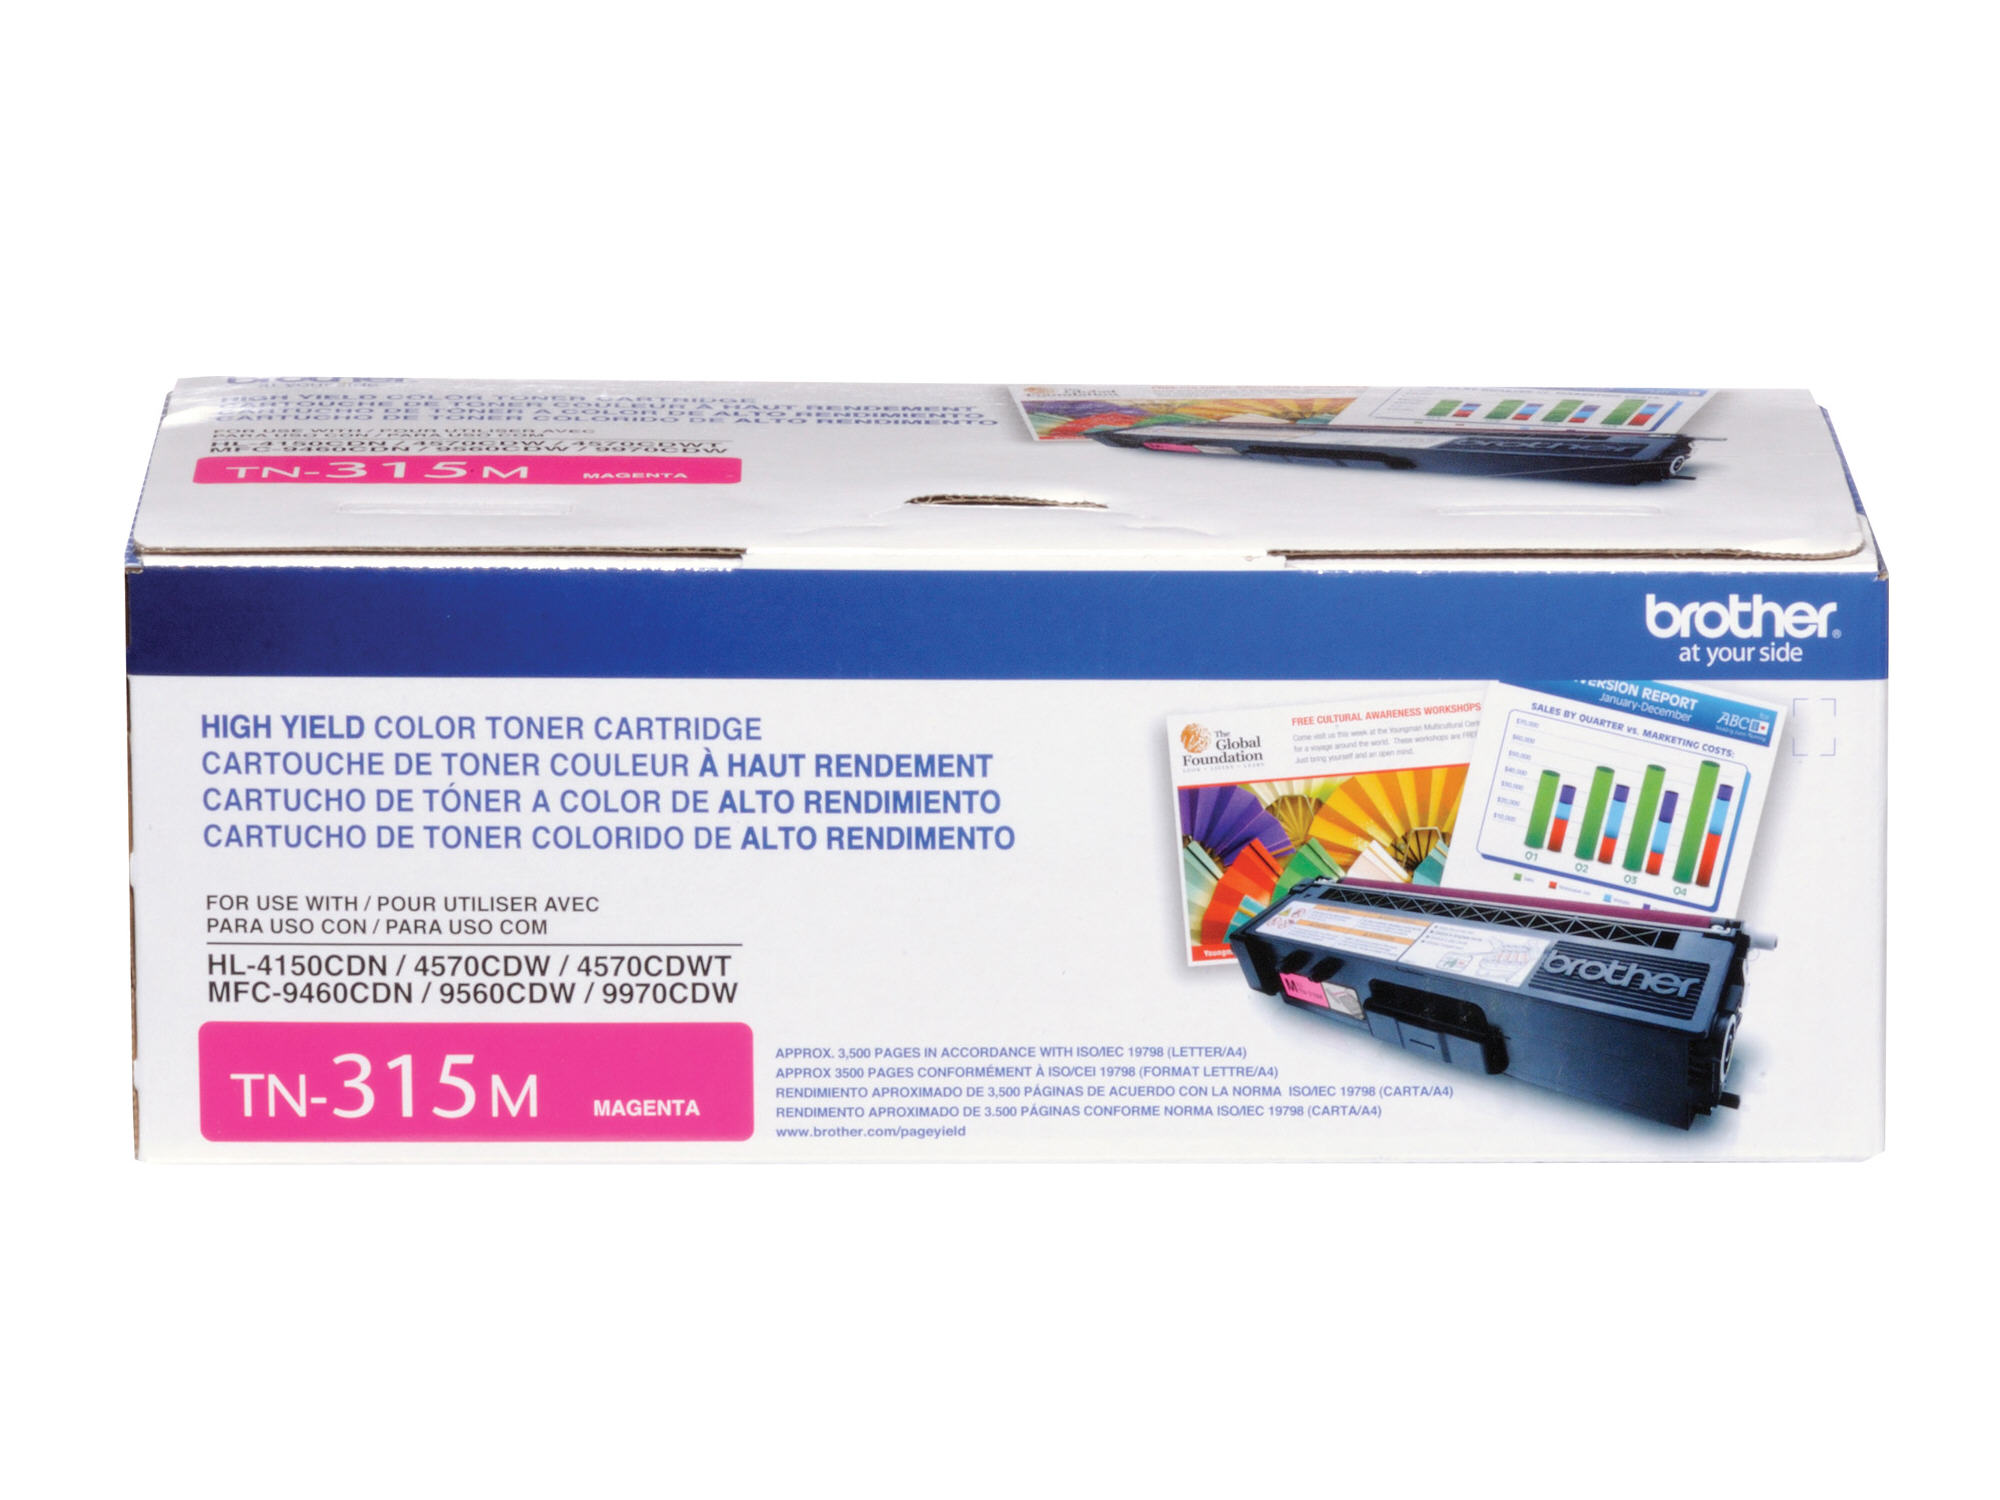 TN315M HIGH YIELD TONER CART MAGENTA High Yield Magenta Toner Cartridge (yields approx. 3,500 pages in accordance with ISO/IEC 19798 on letter/A4 size paper) MAGENTA HIGH YIELD TONER FOR HL4150CDN HL4570CDW HL4570CDWT